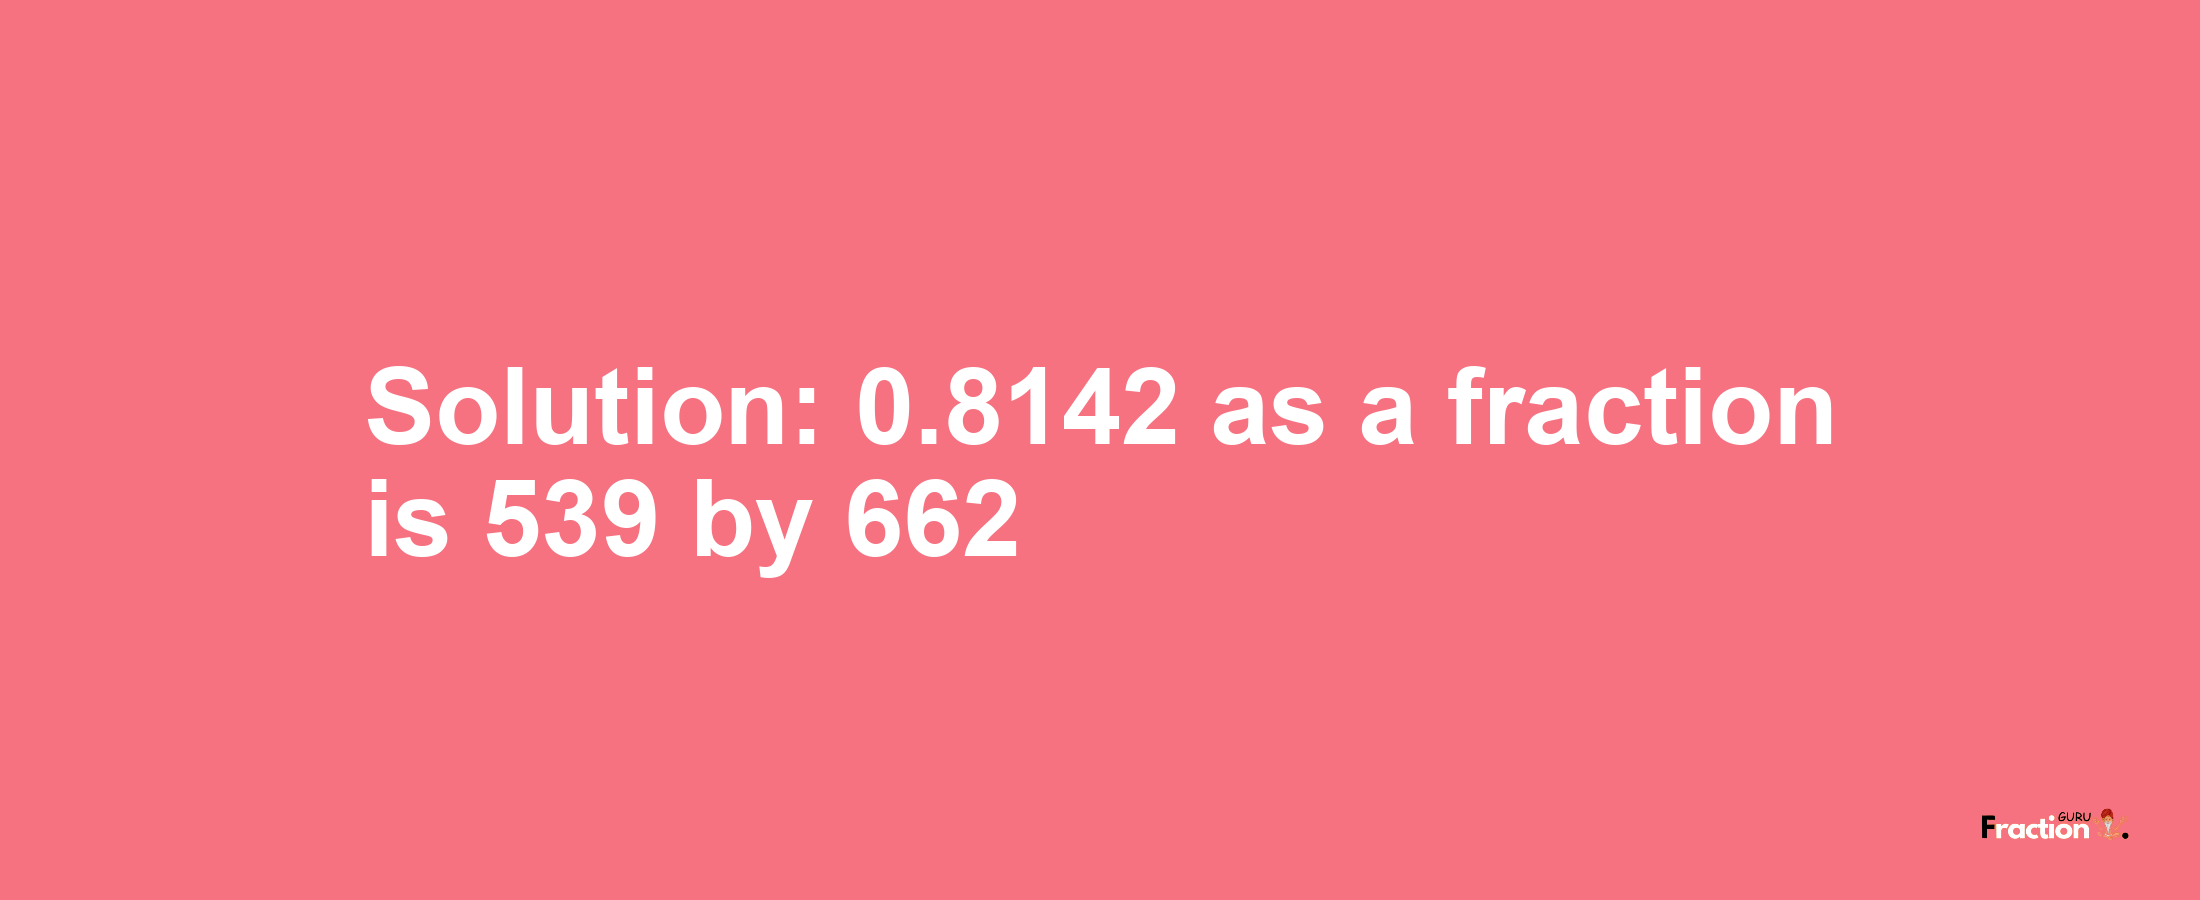 Solution:0.8142 as a fraction is 539/662